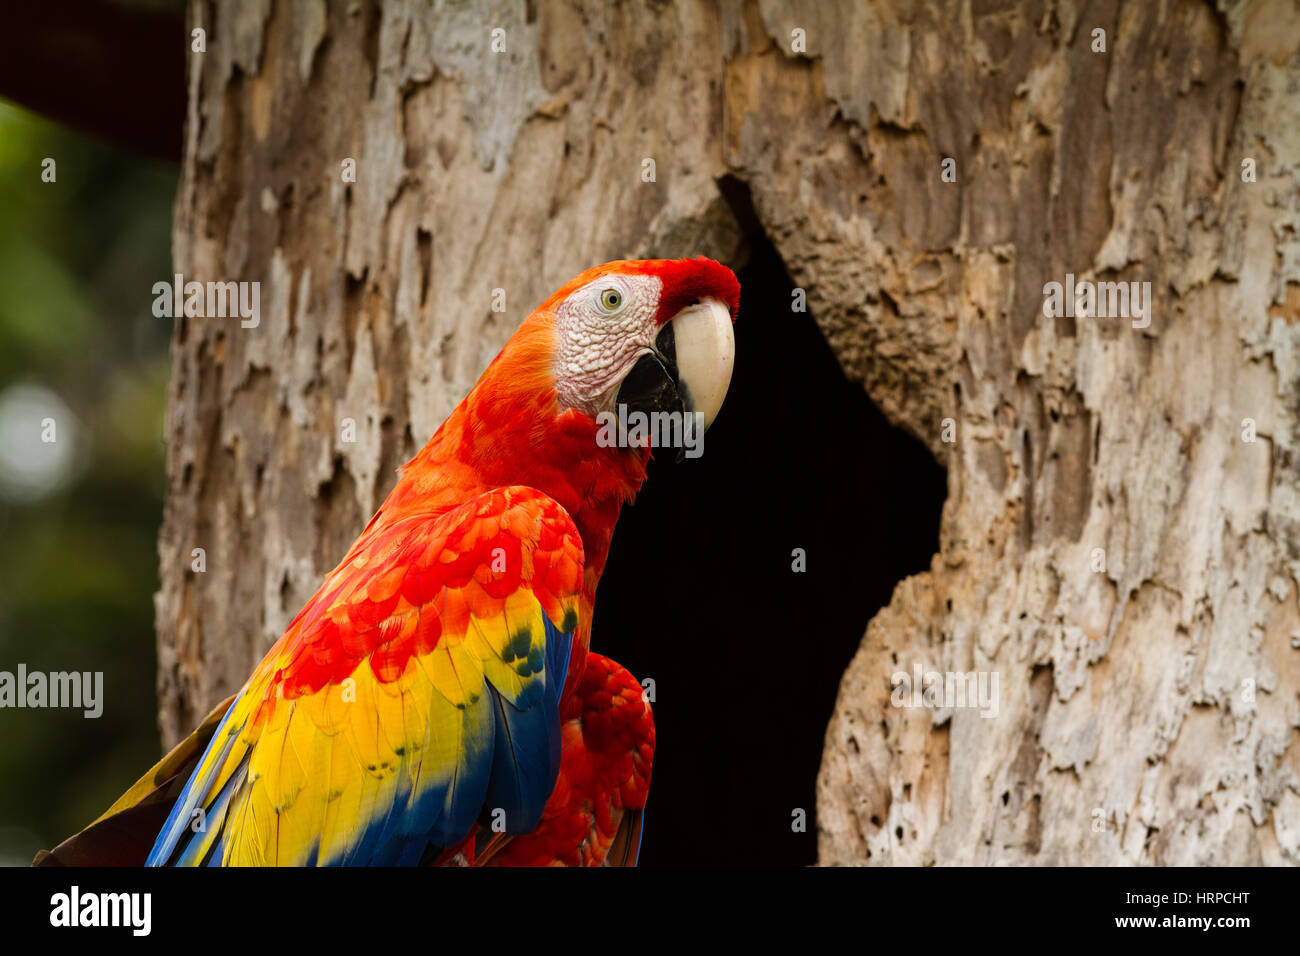 The Scarlet Macaw, Ara macao, nests in hollow cavities in trees.  Photographed in Costa Rica Stock Photo - Alamy